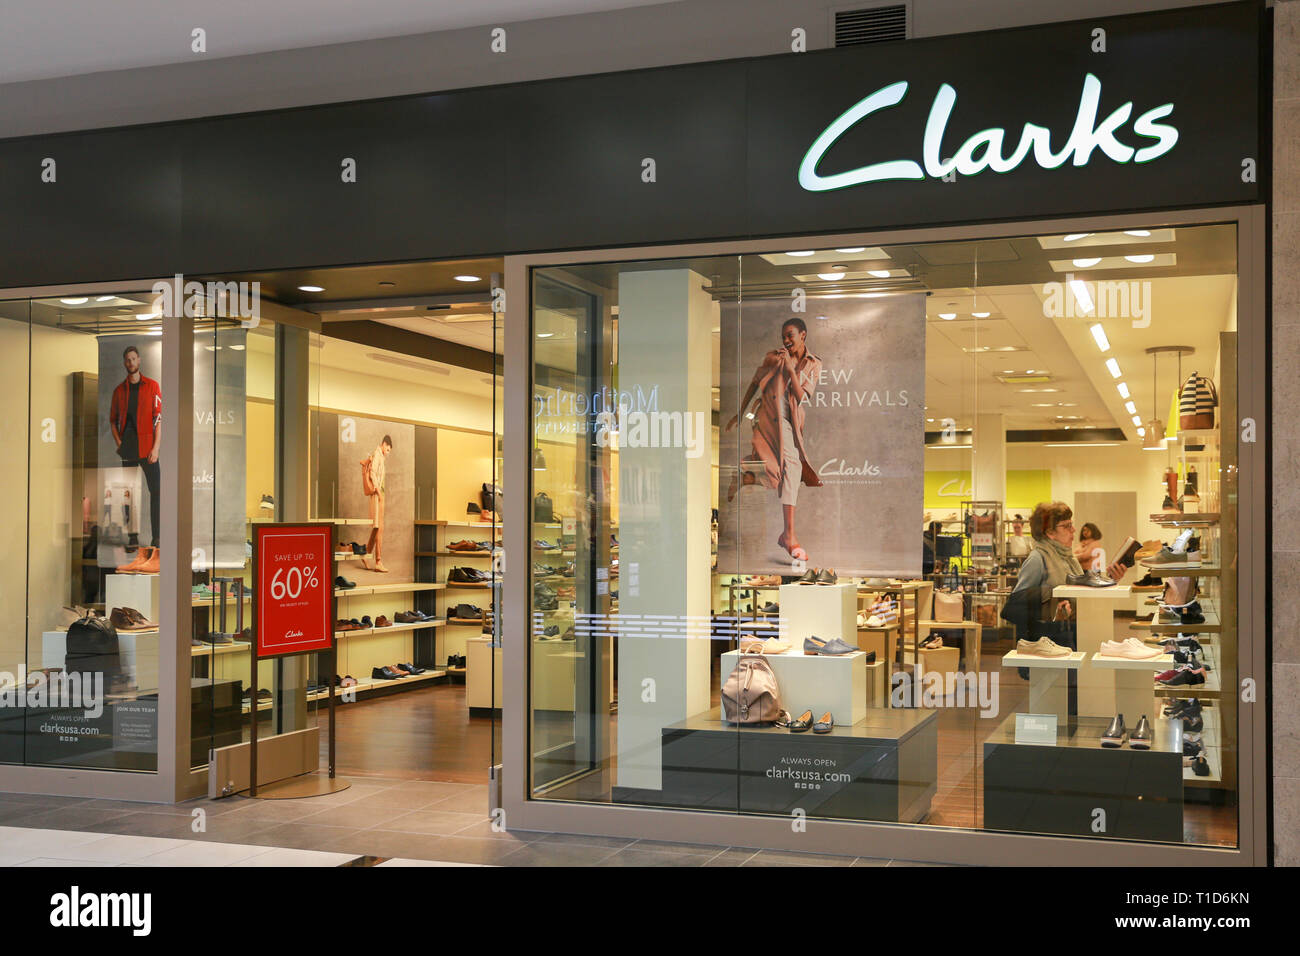 clarks shoes international mall off 78 